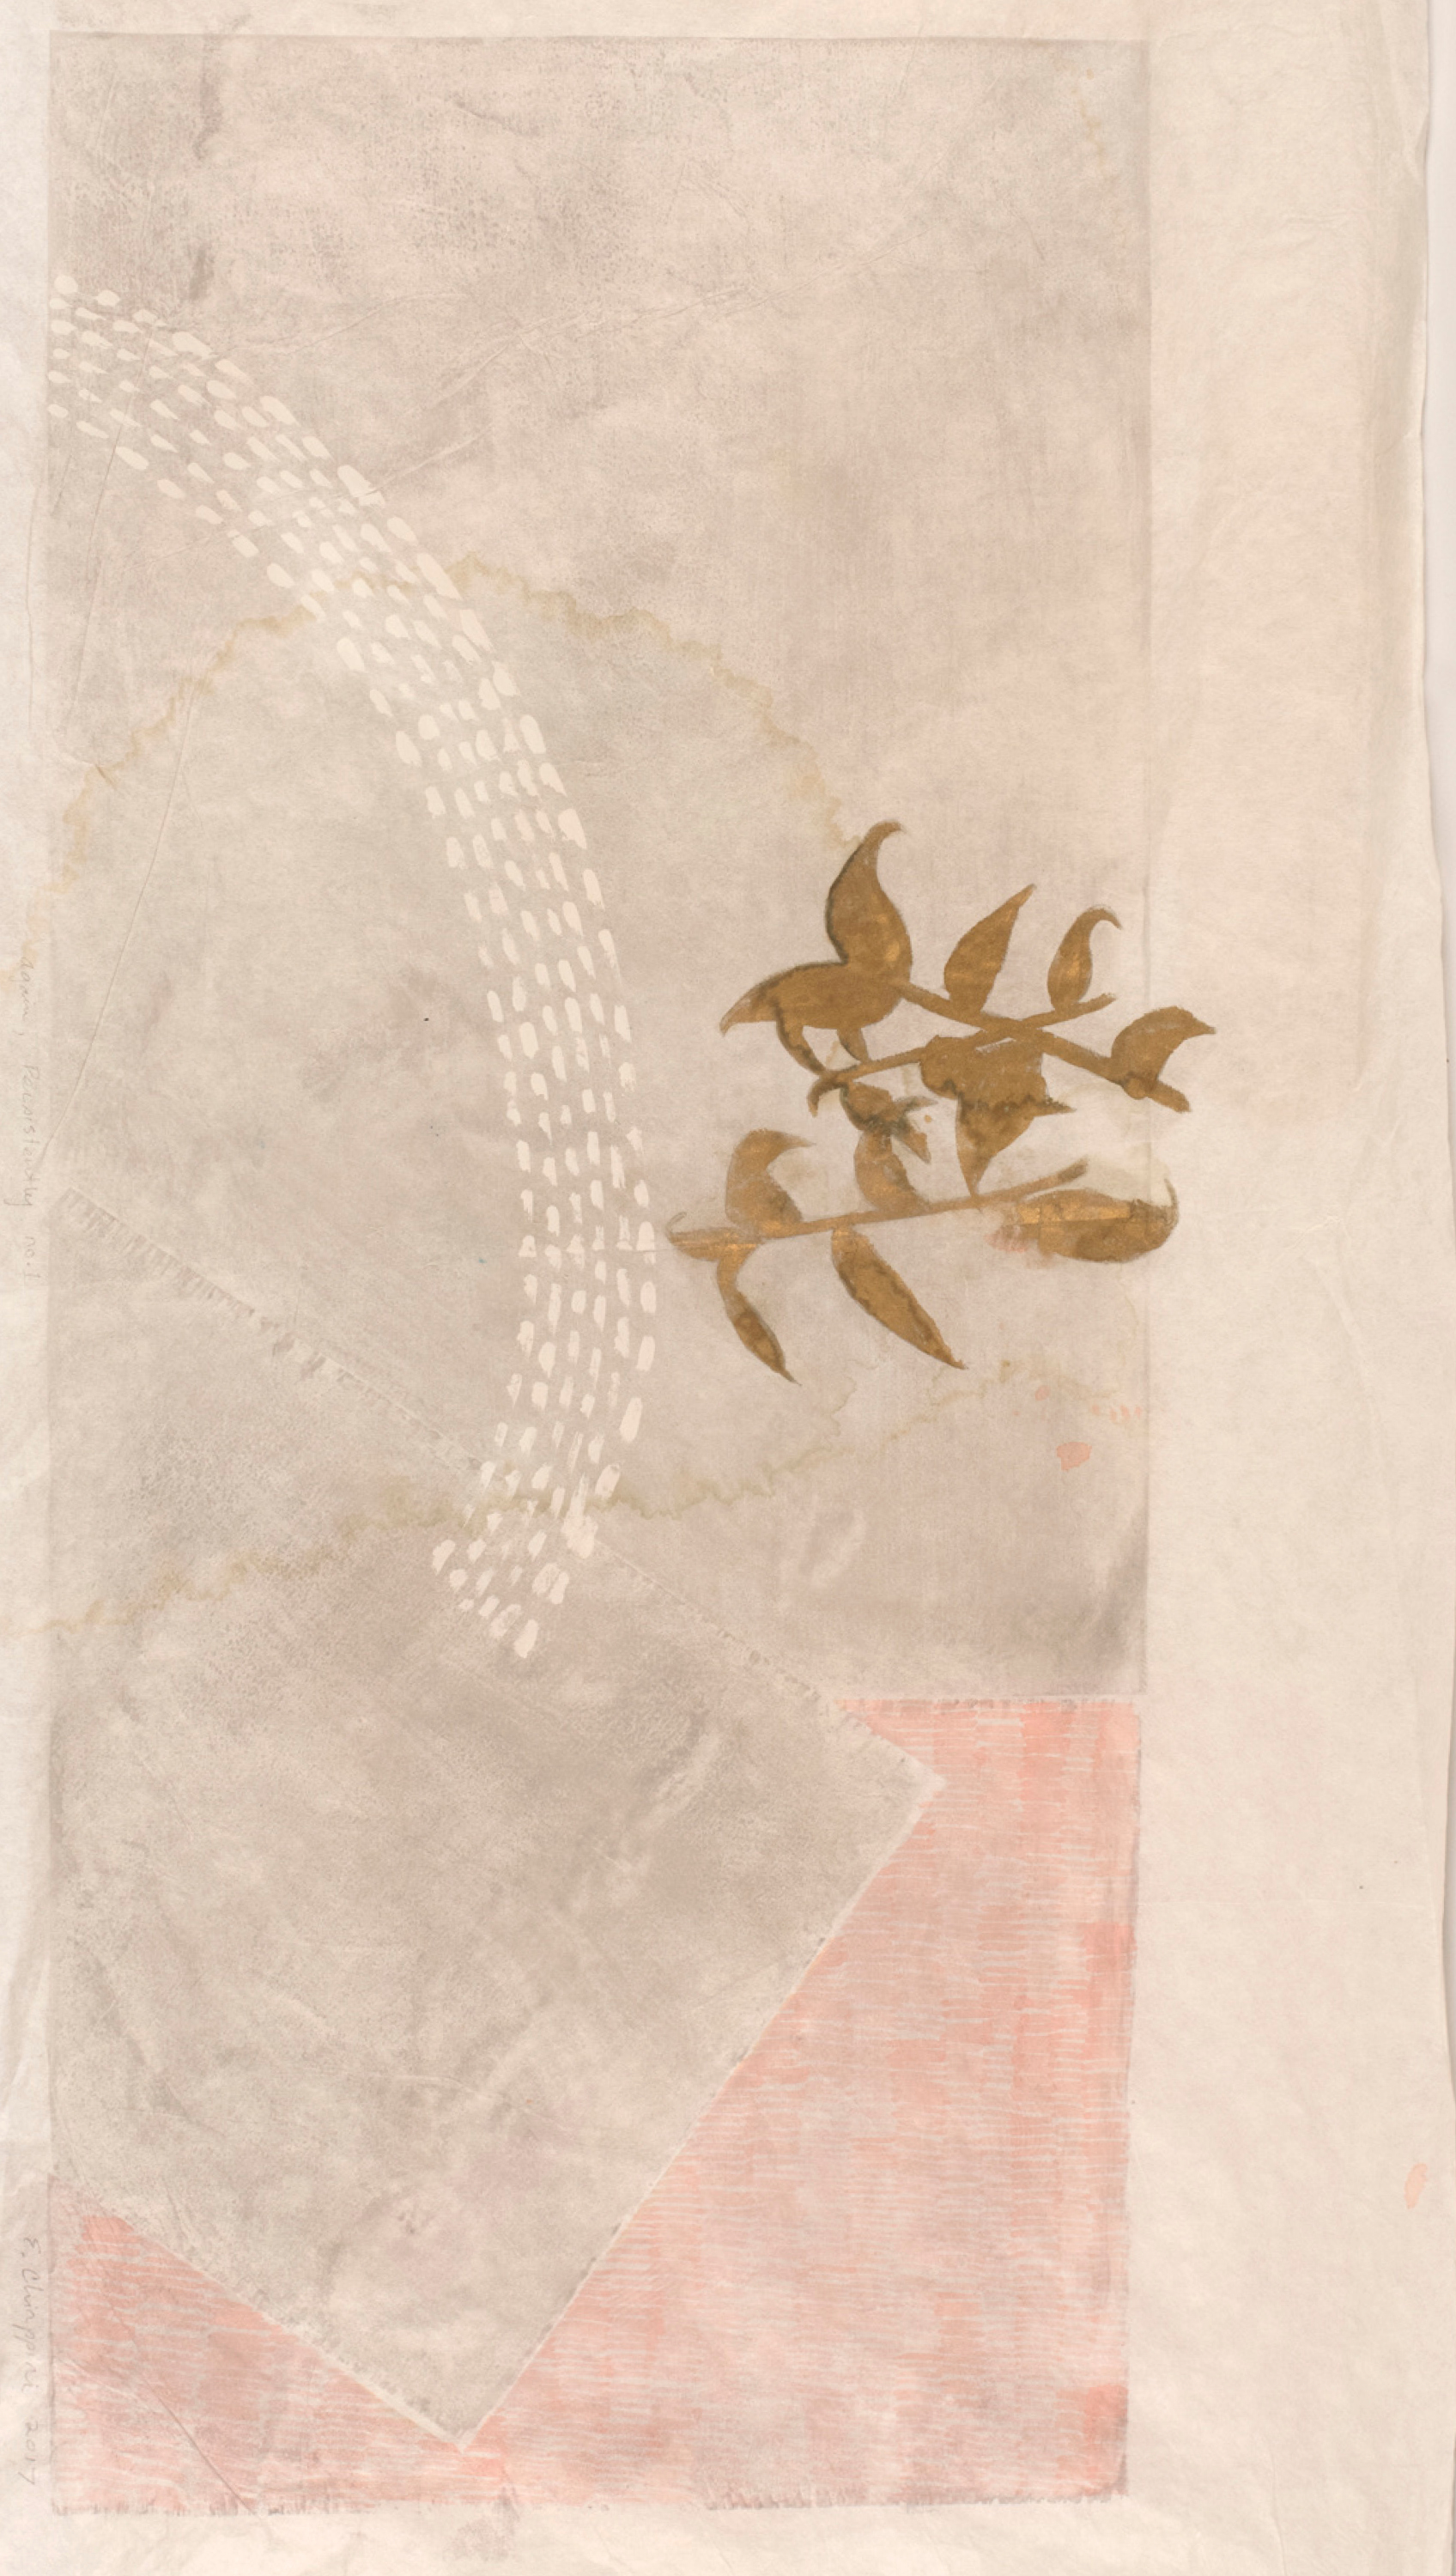 tan and white paper with a gold flower-like forms impressed within